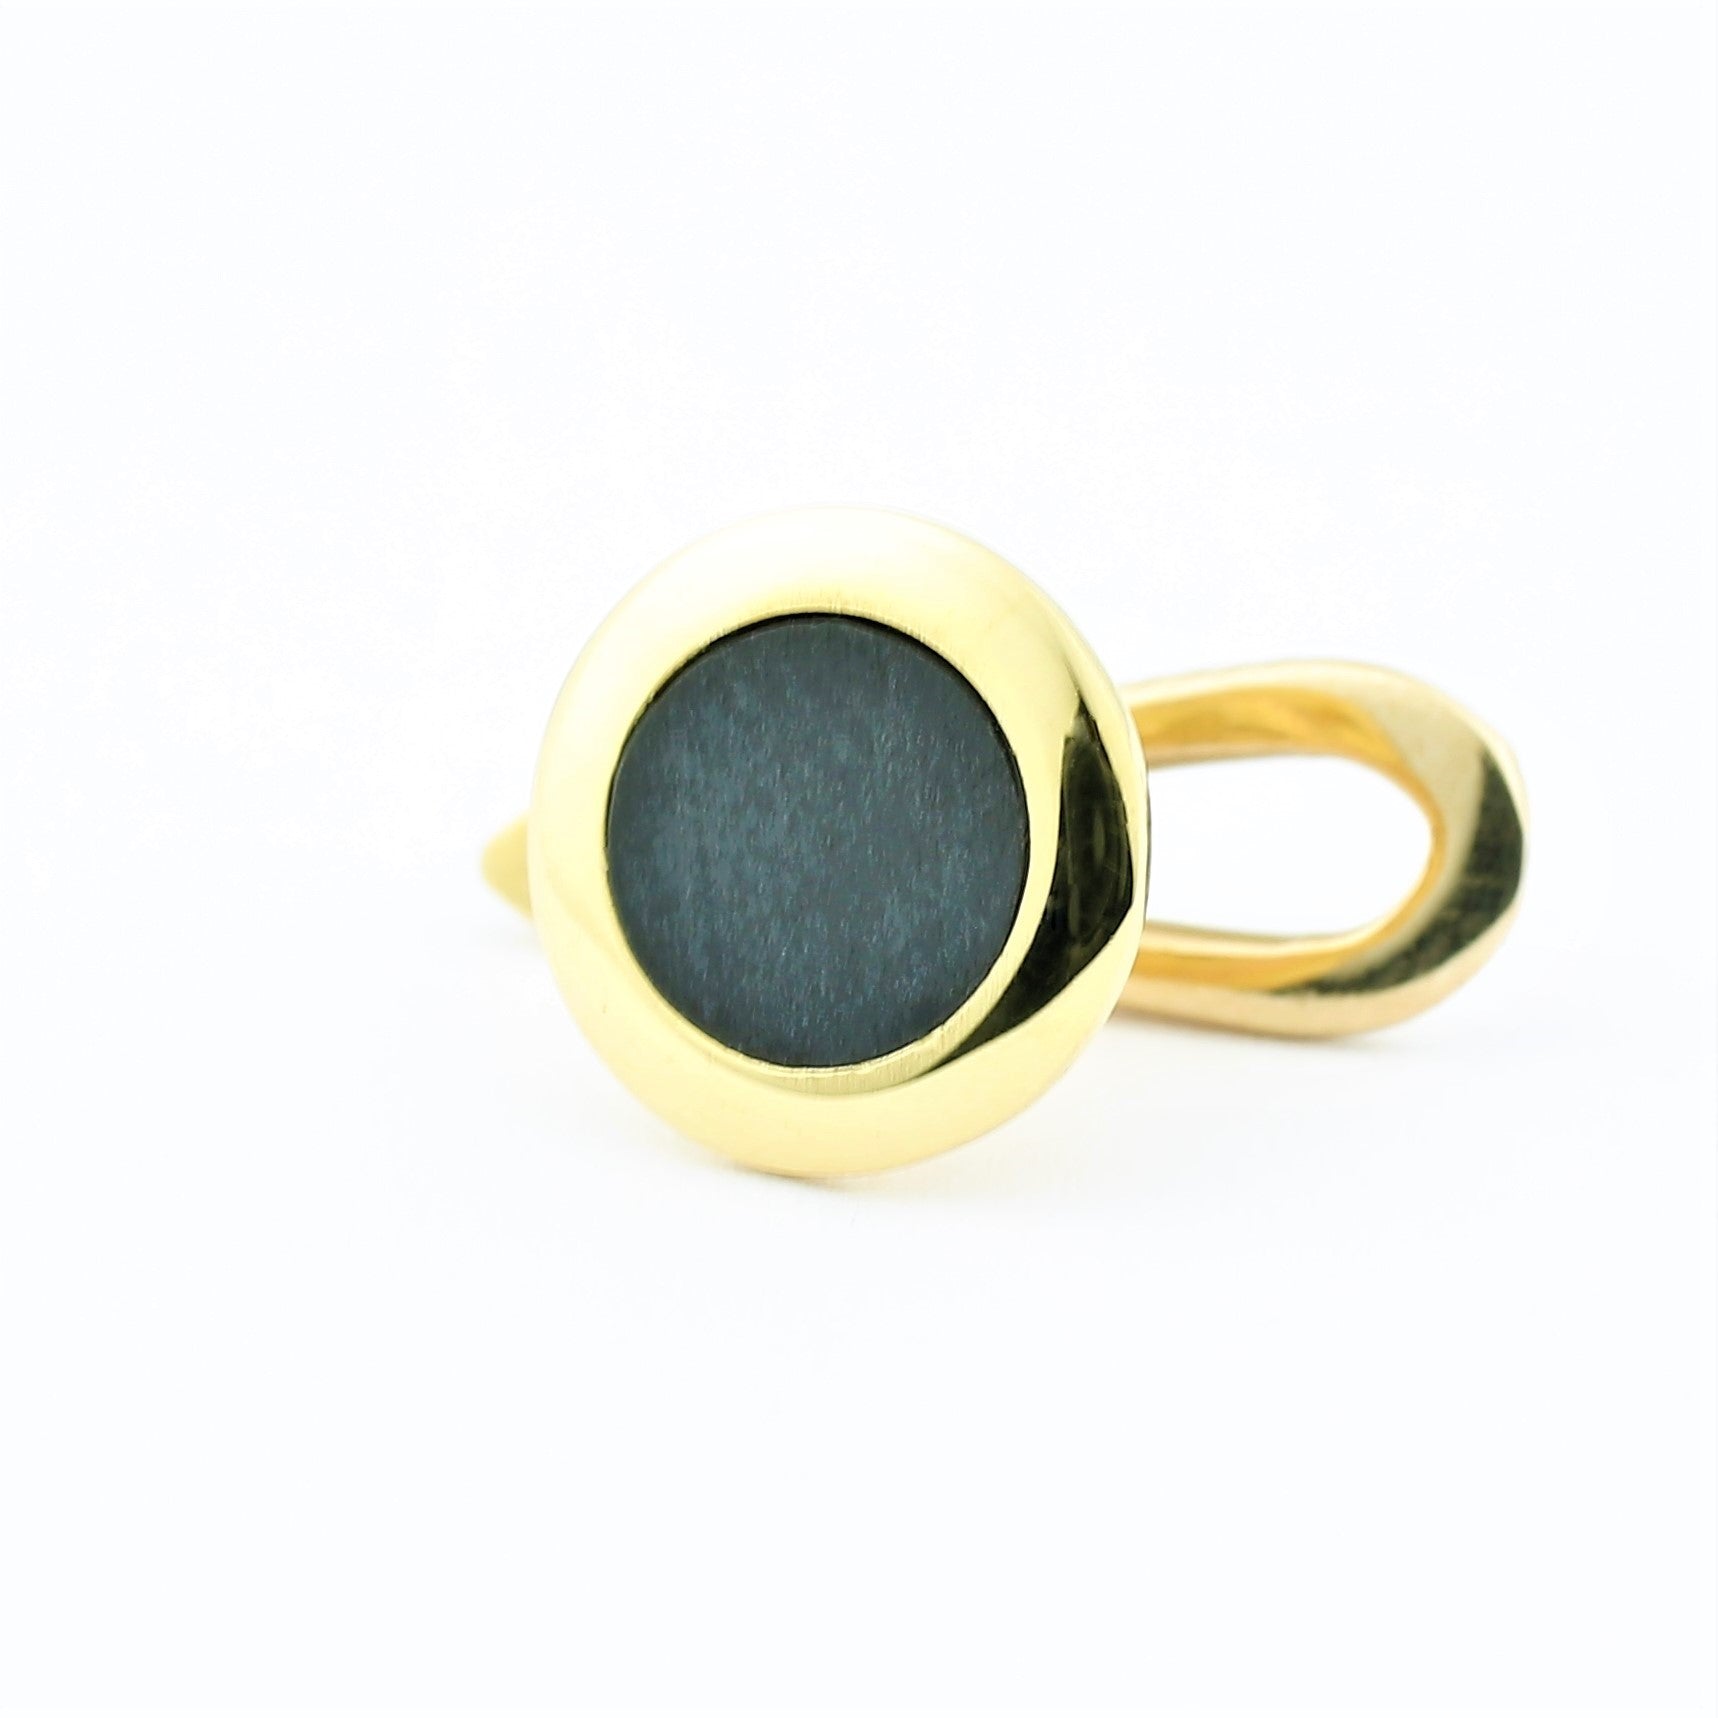 Onyx studs in 18k yellow gold